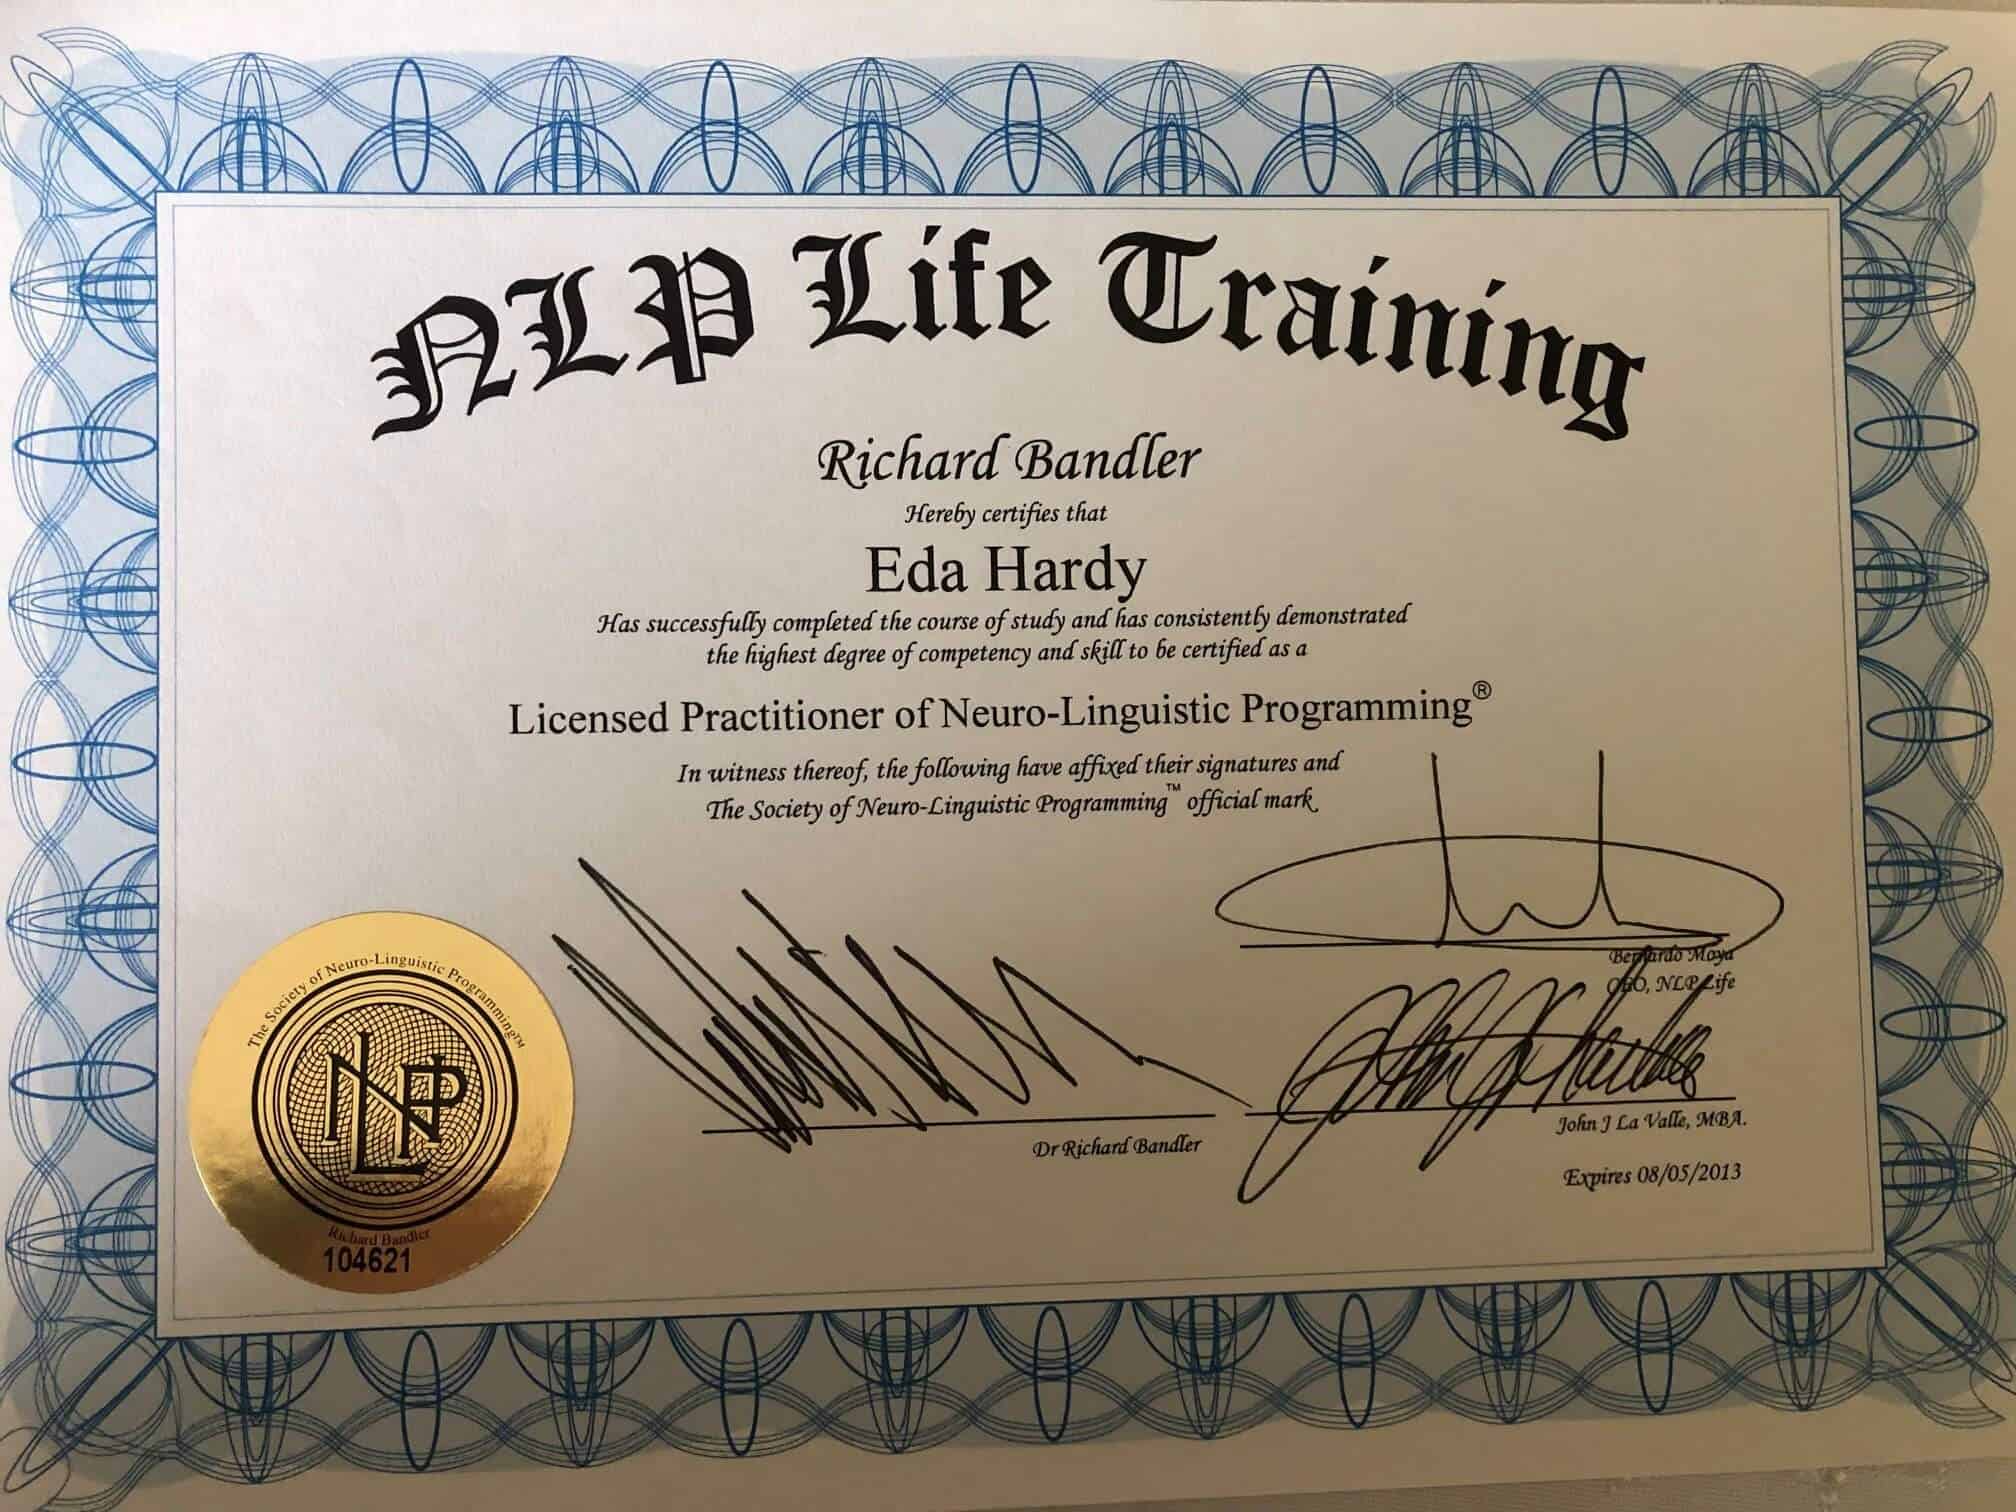 NLP Life Training Licensed Practitioner of Neuro-Linguistic Programming Certificate - Eda Hardy